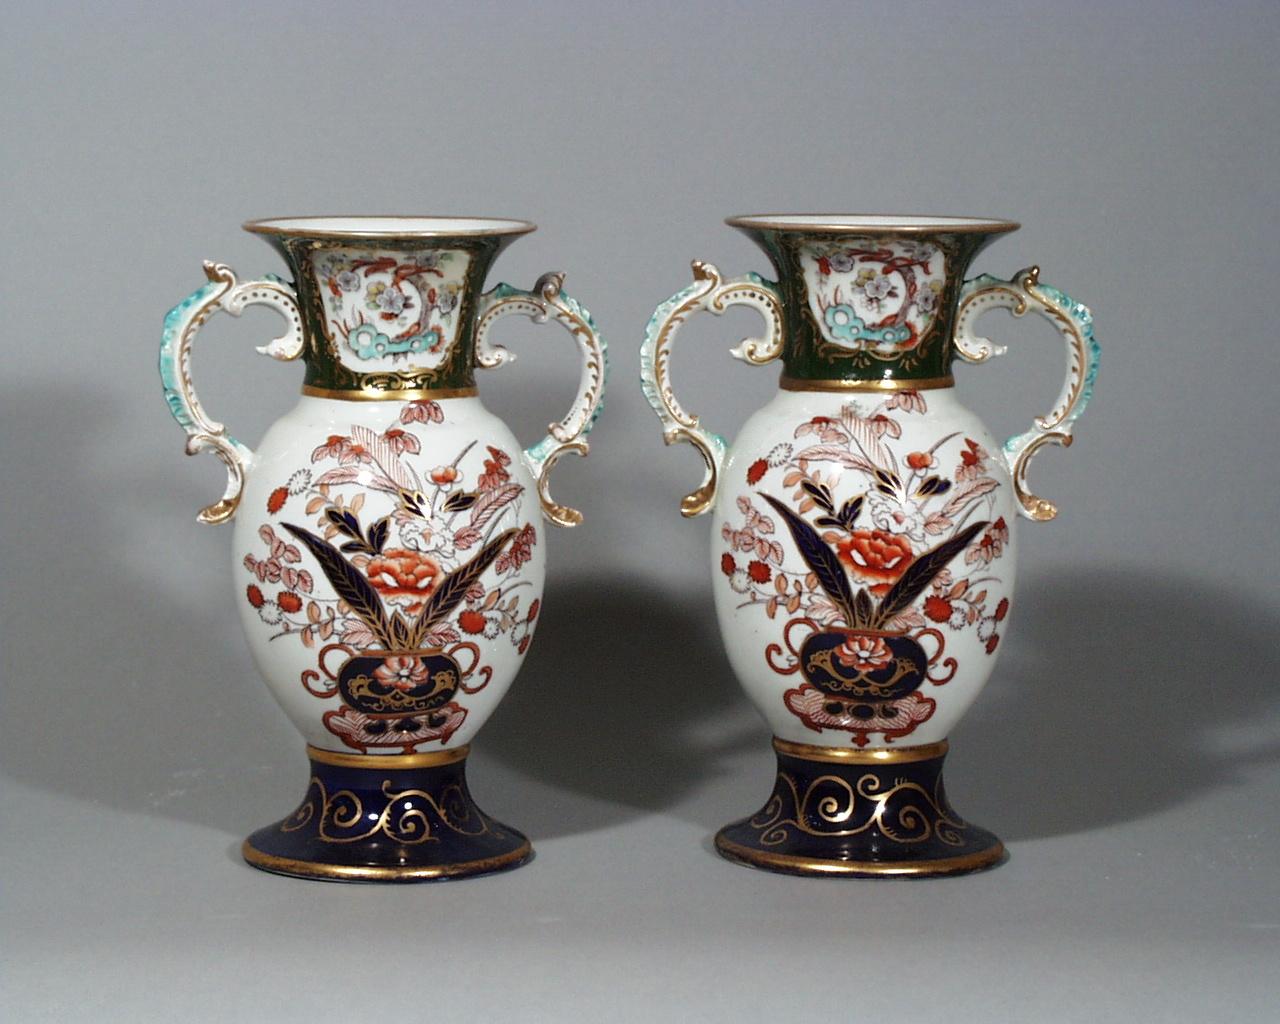 Mason's ironstone Japan pattern pair of vases,
circa 1830-1840.
 
The vases are decorated in an imari palette with scroll handles highlighted in turquoise and gilt. The circular flaring foot is in a mazarine blue ground with gilt highlights. The